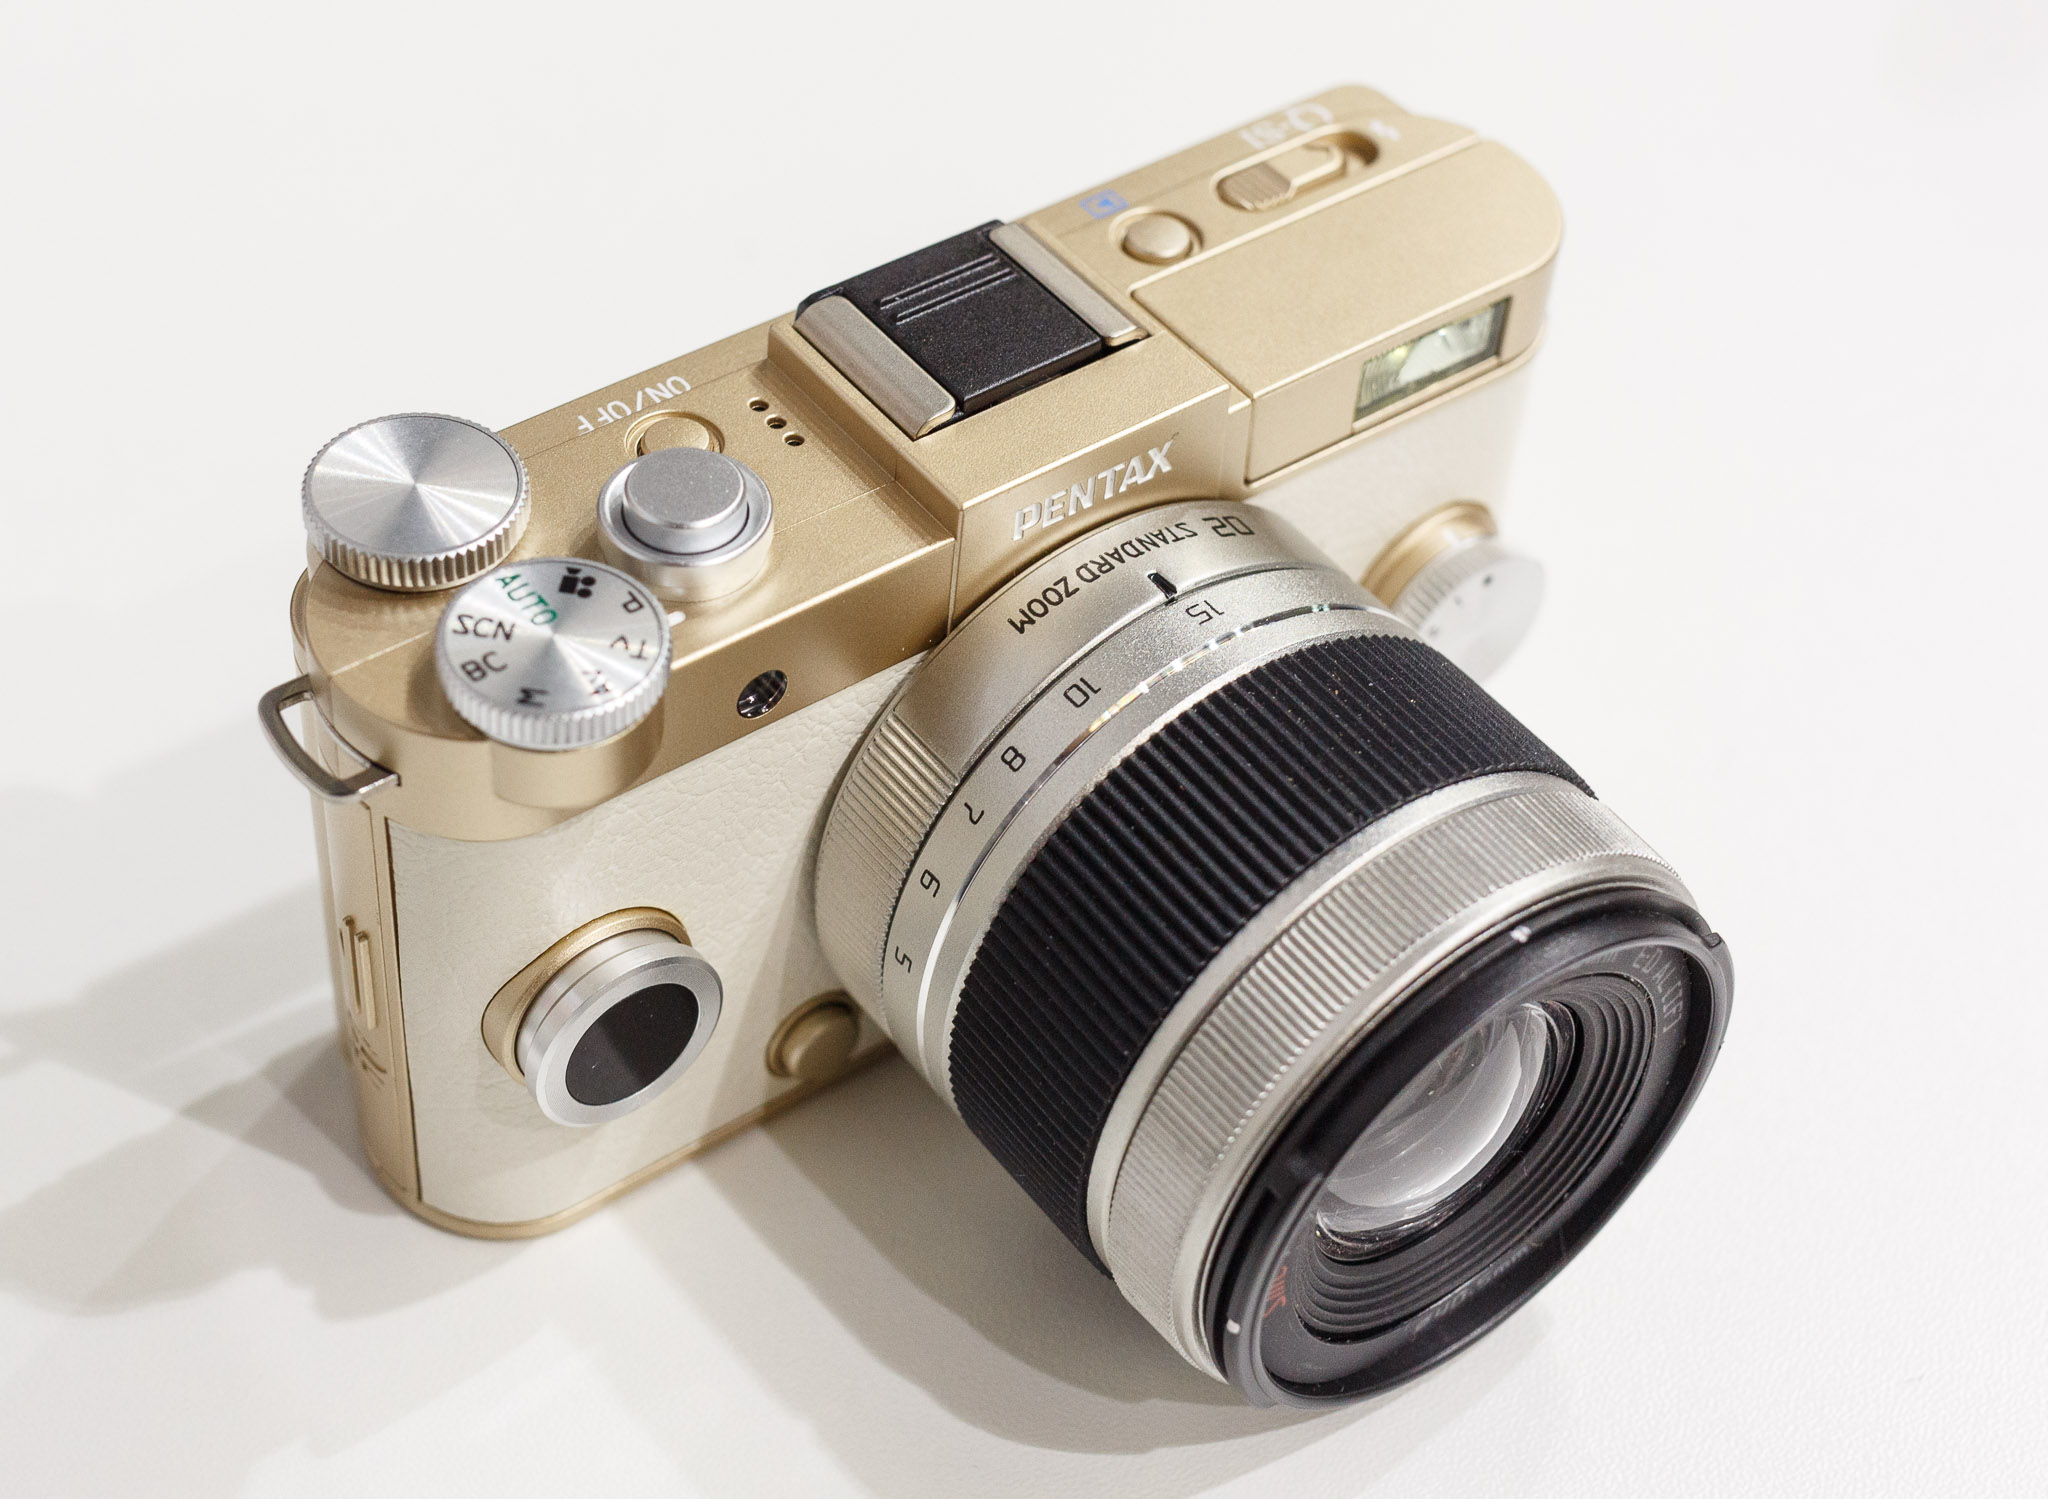 Pentax Q-S1 is very small camera but features a choice of eight interchangeable lenses.